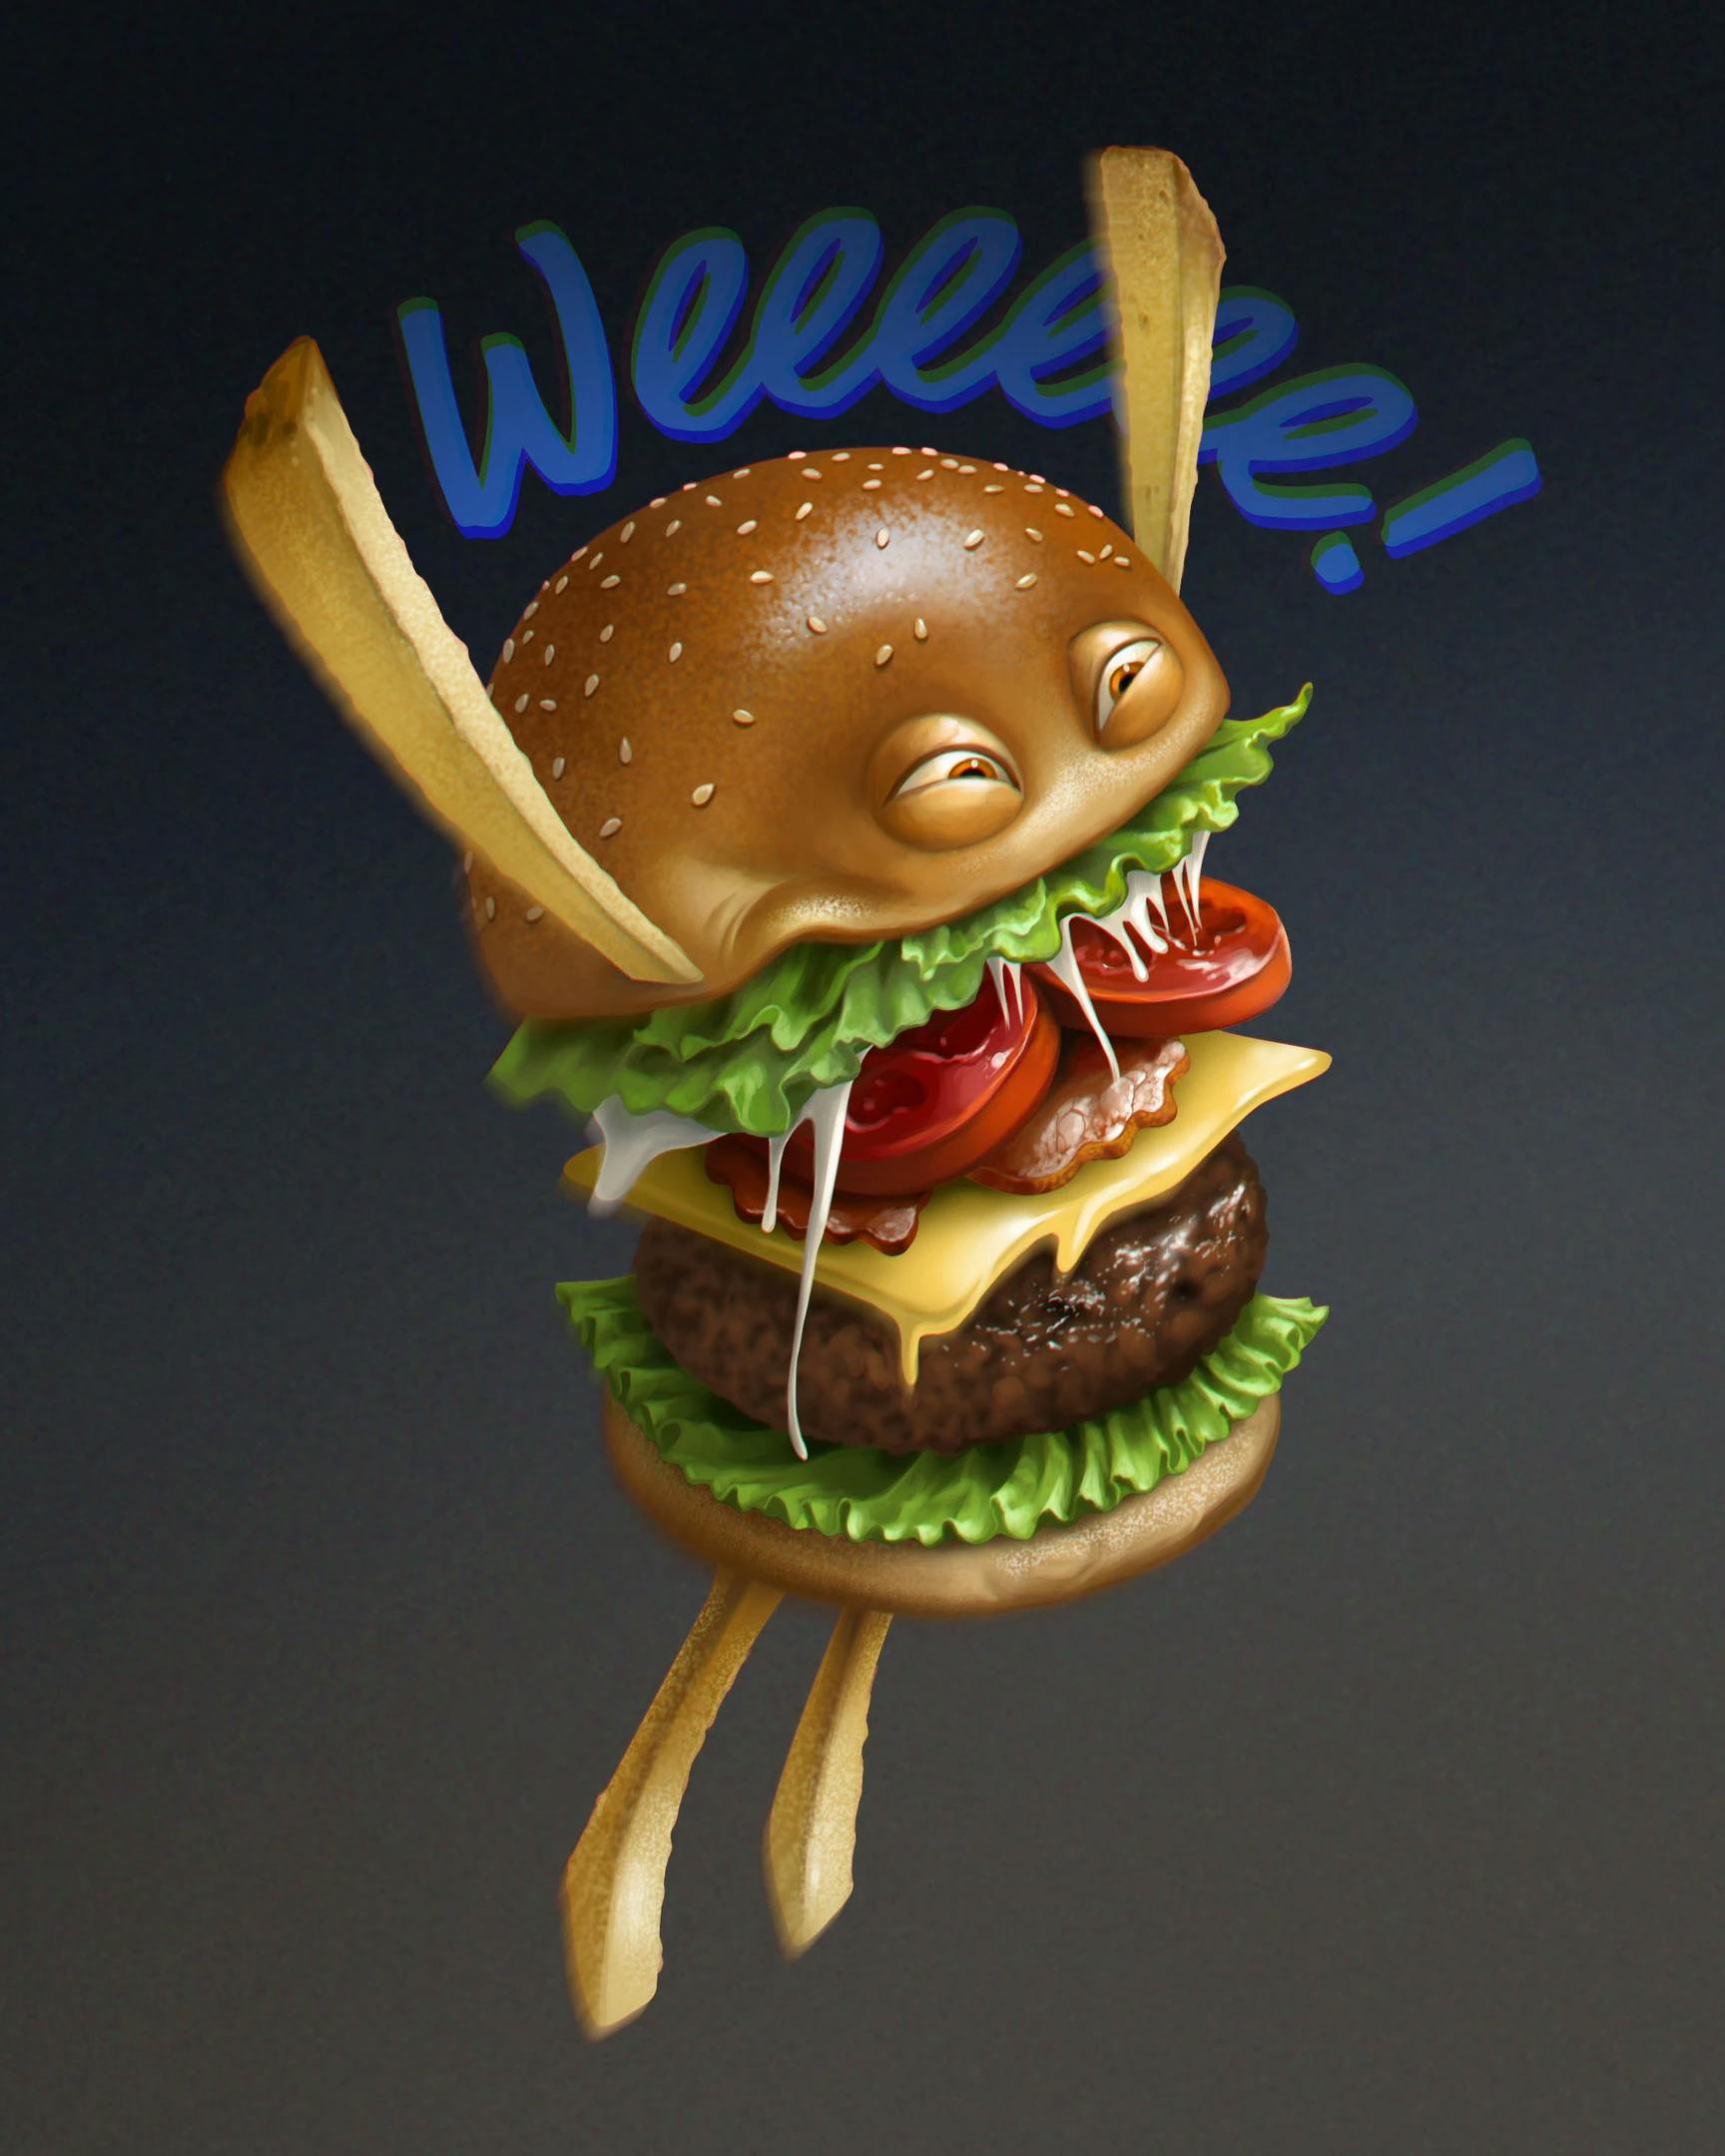 An illustration of a personified hamburger jumping for joy